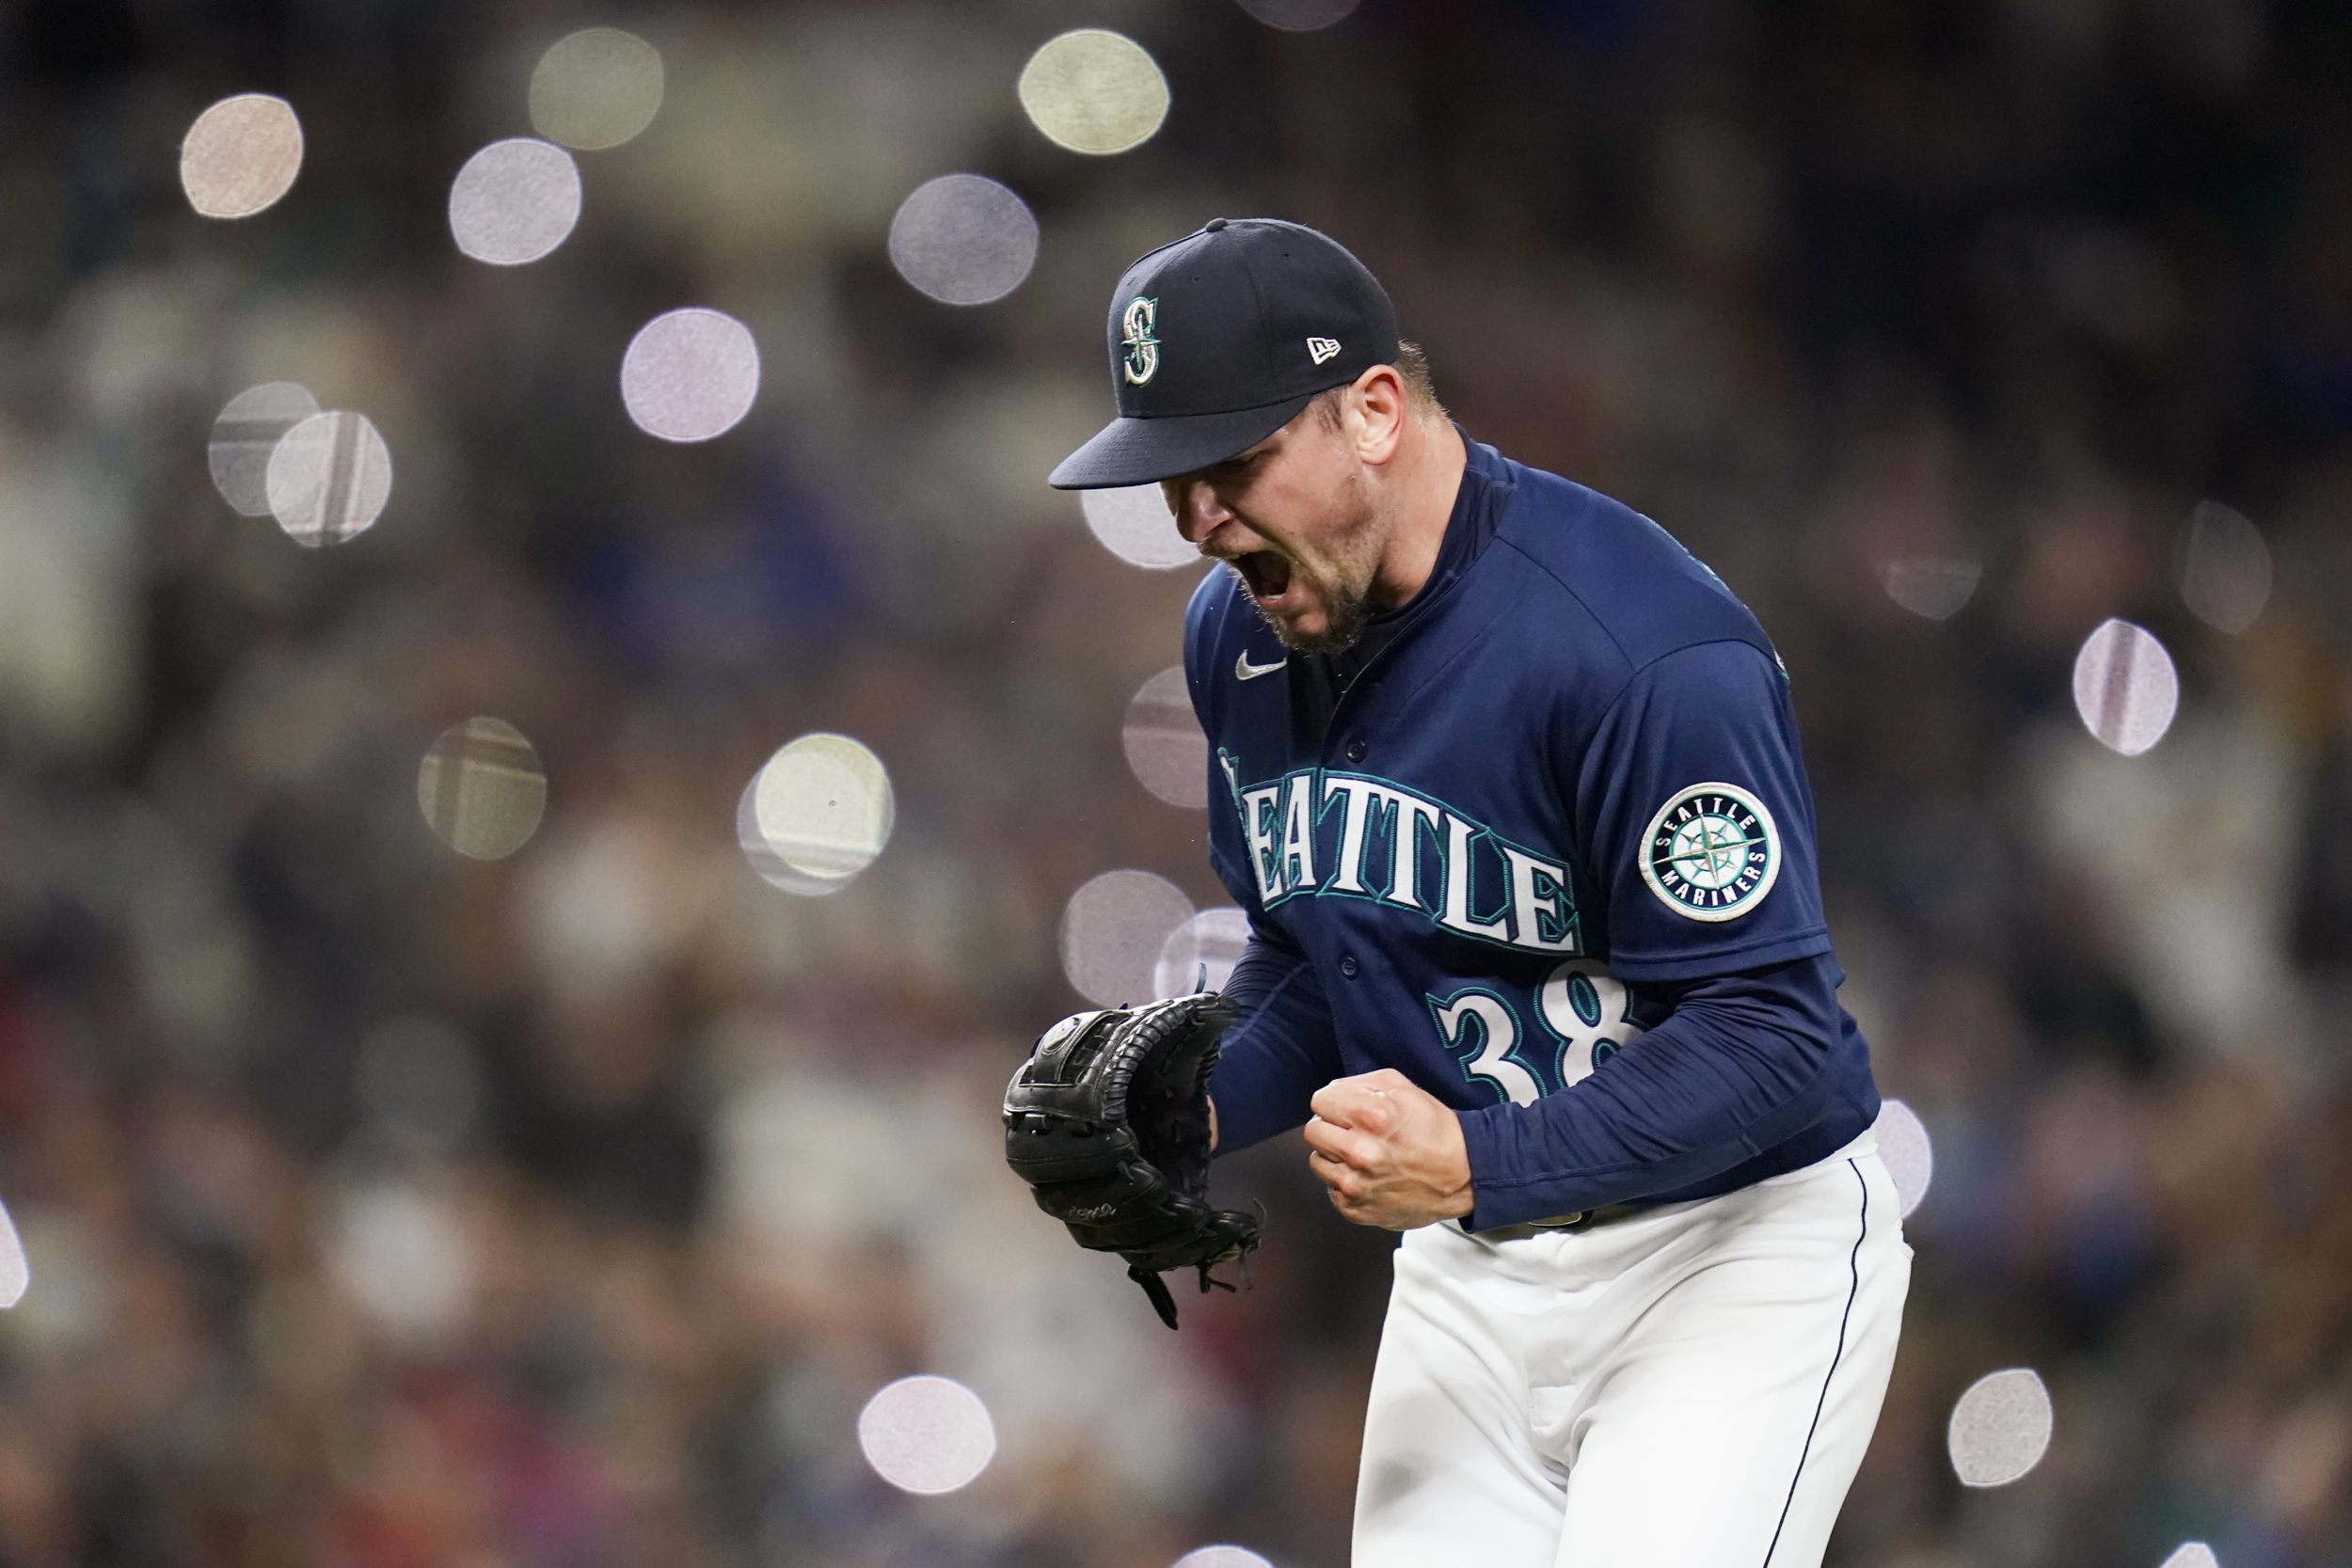 Haniger lifts Mariners over Guardians in extra innings